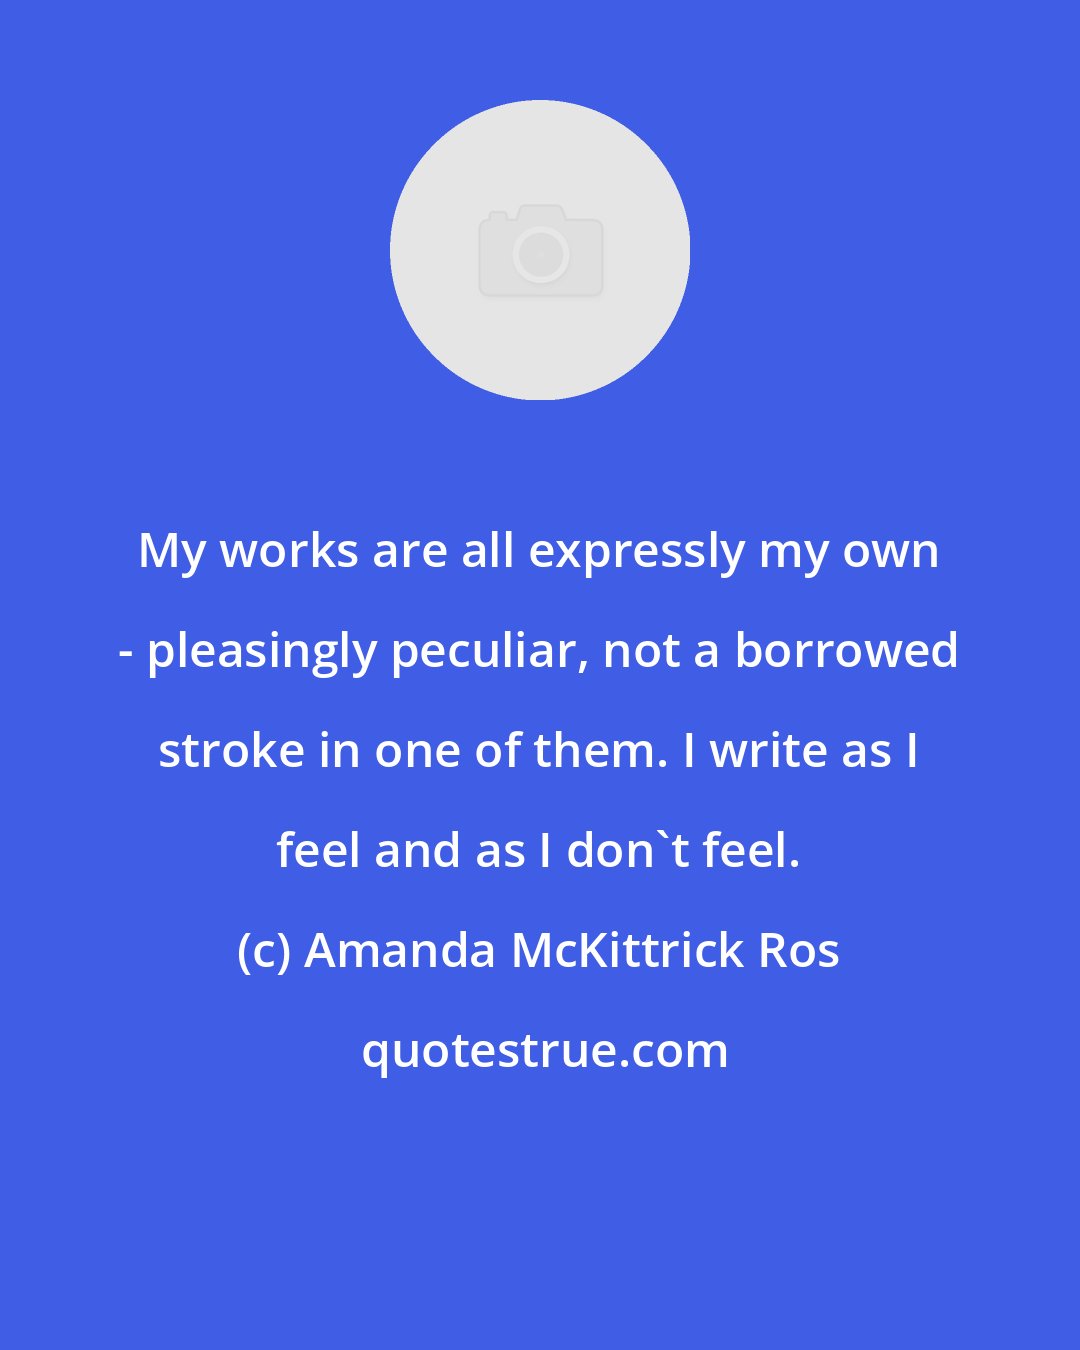 Amanda McKittrick Ros: My works are all expressly my own - pleasingly peculiar, not a borrowed stroke in one of them. I write as I feel and as I don't feel.